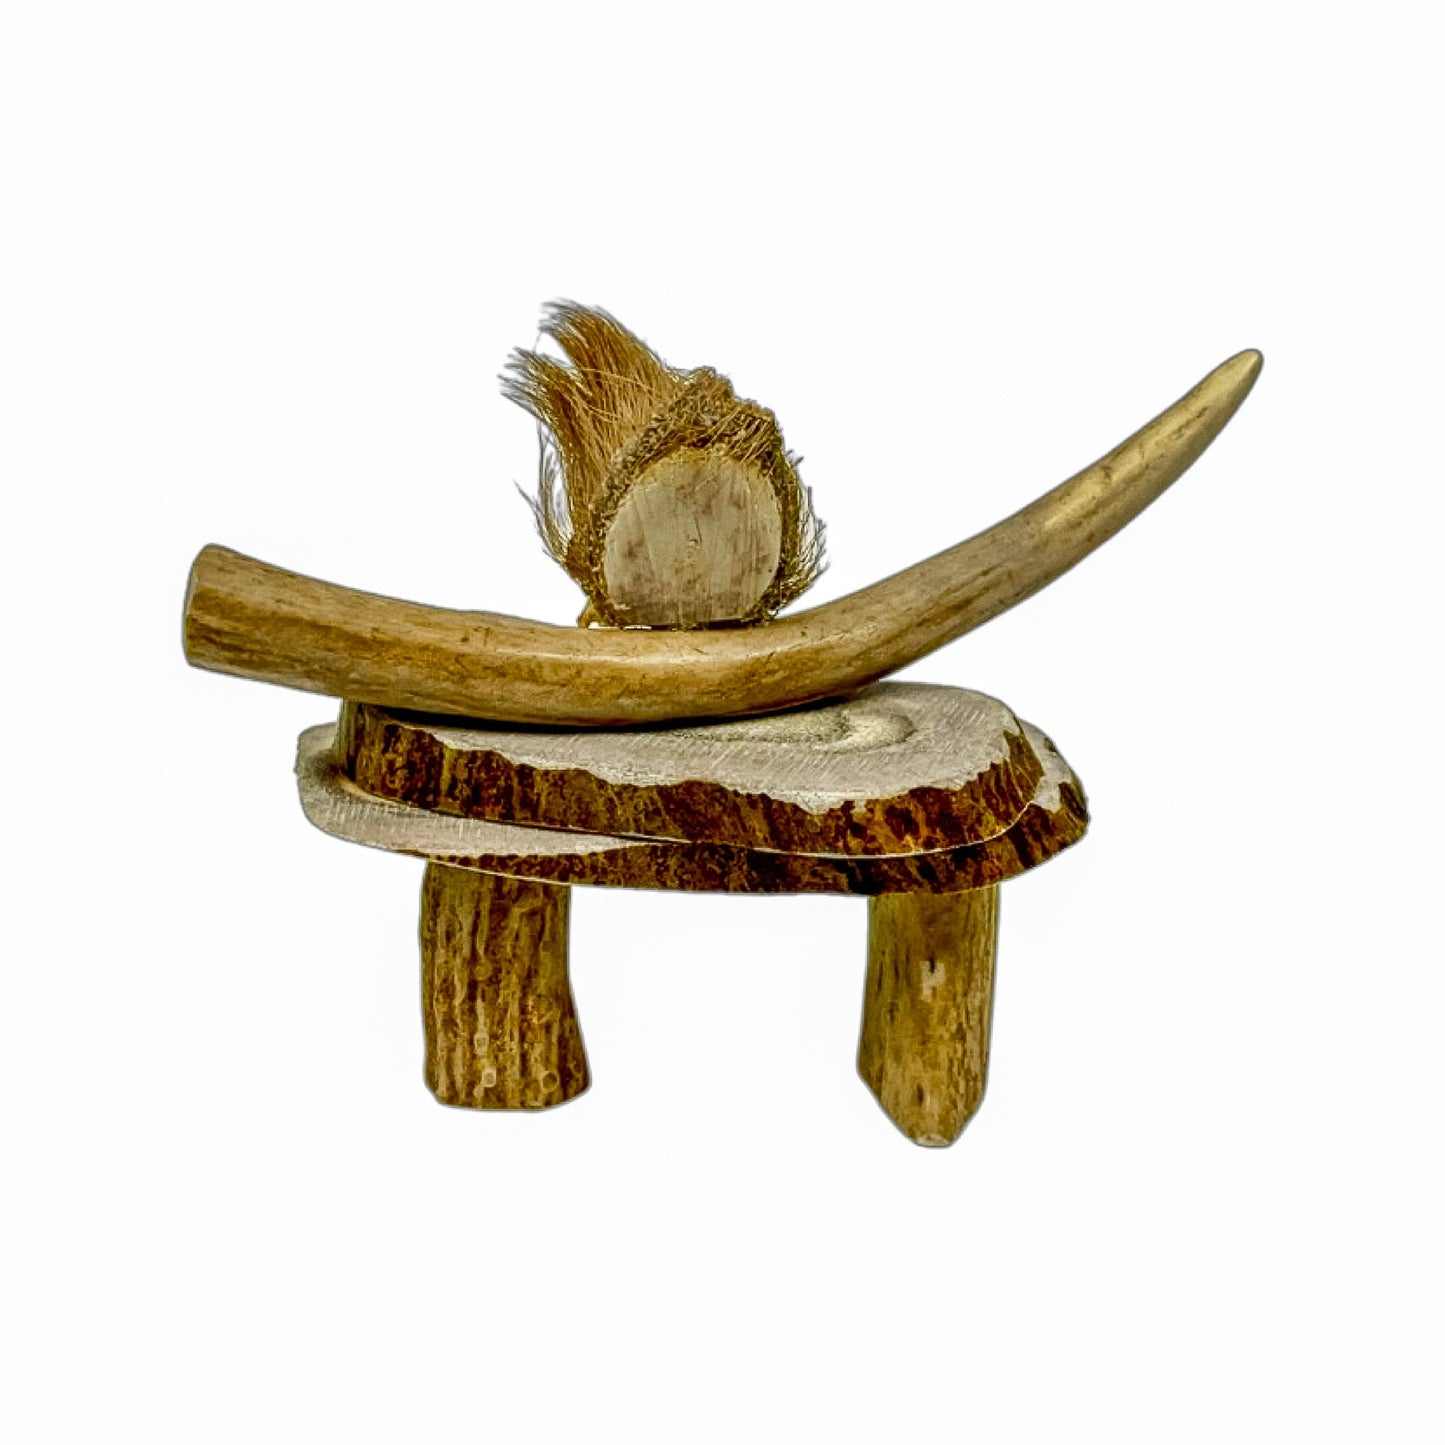 An Inukshuk  Home Decor made from Deer antlers